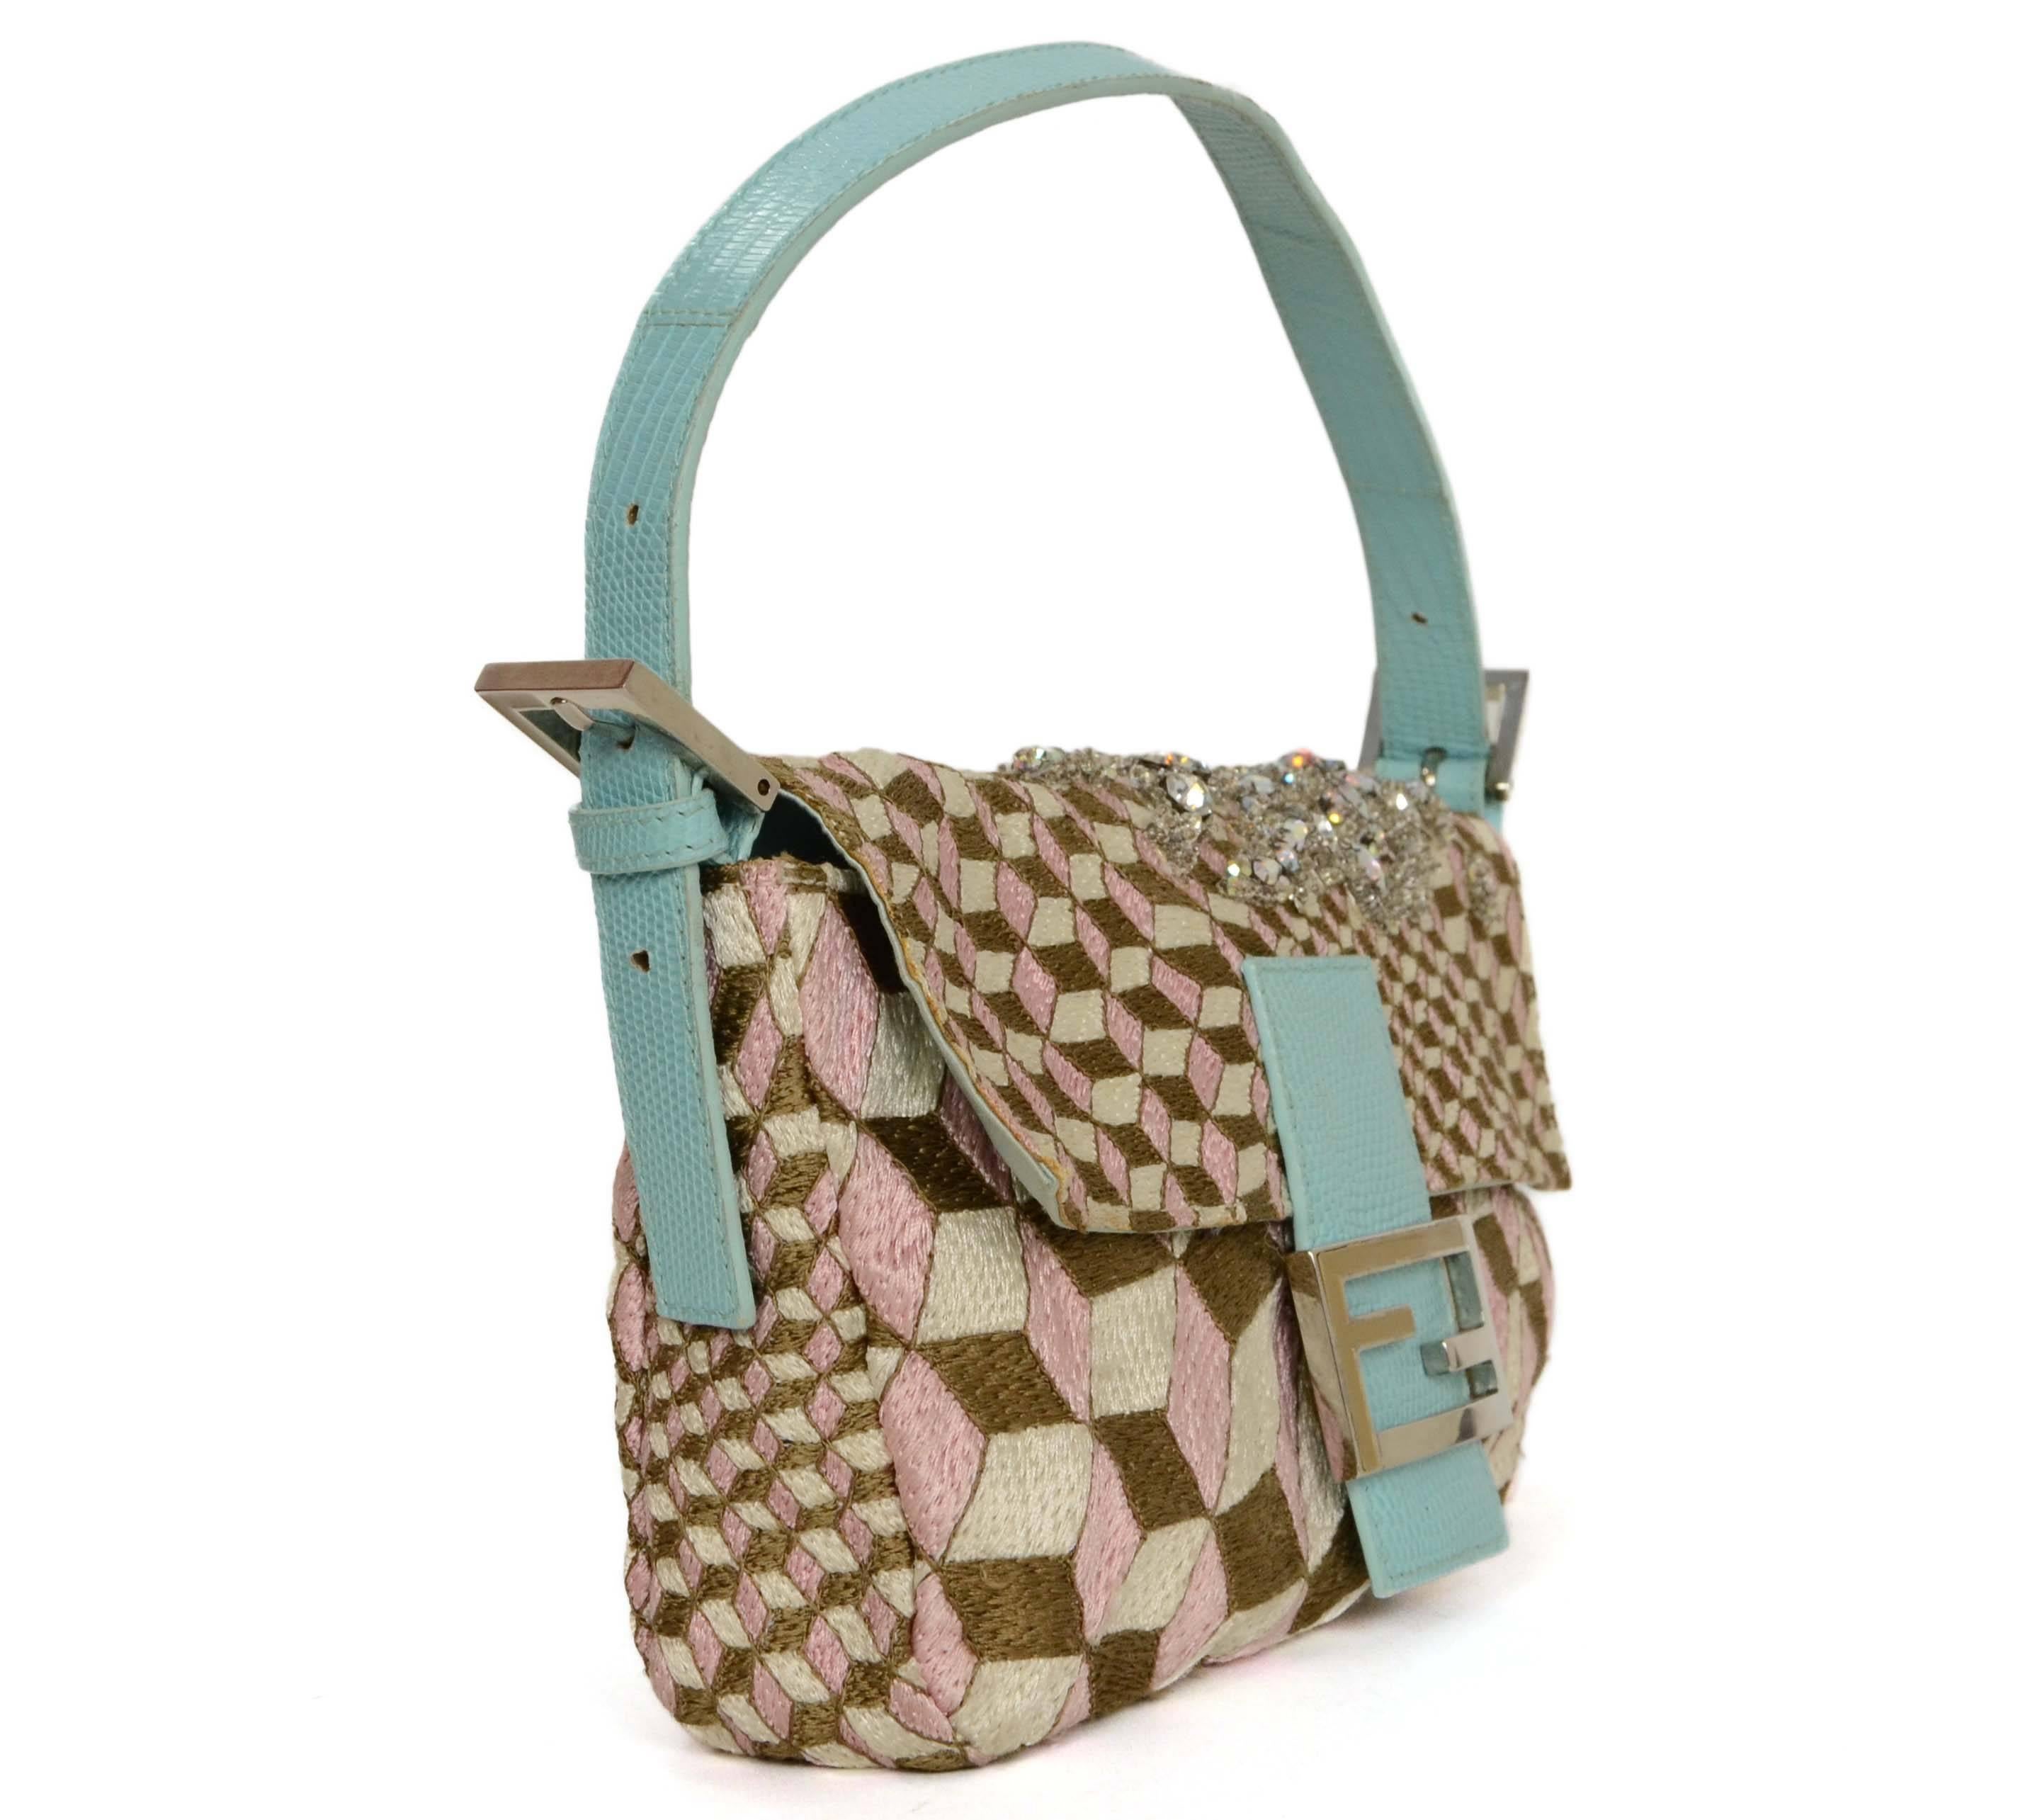 Features cube print with crystal and bead detailing over the top and back of the bag.  Baby blue lizard trim completes the delicate, yet sophisticated look.

-Made In: Italy
-Color: Brown, cream, pink and blue
-Hardware: Silvertone
-Materials: